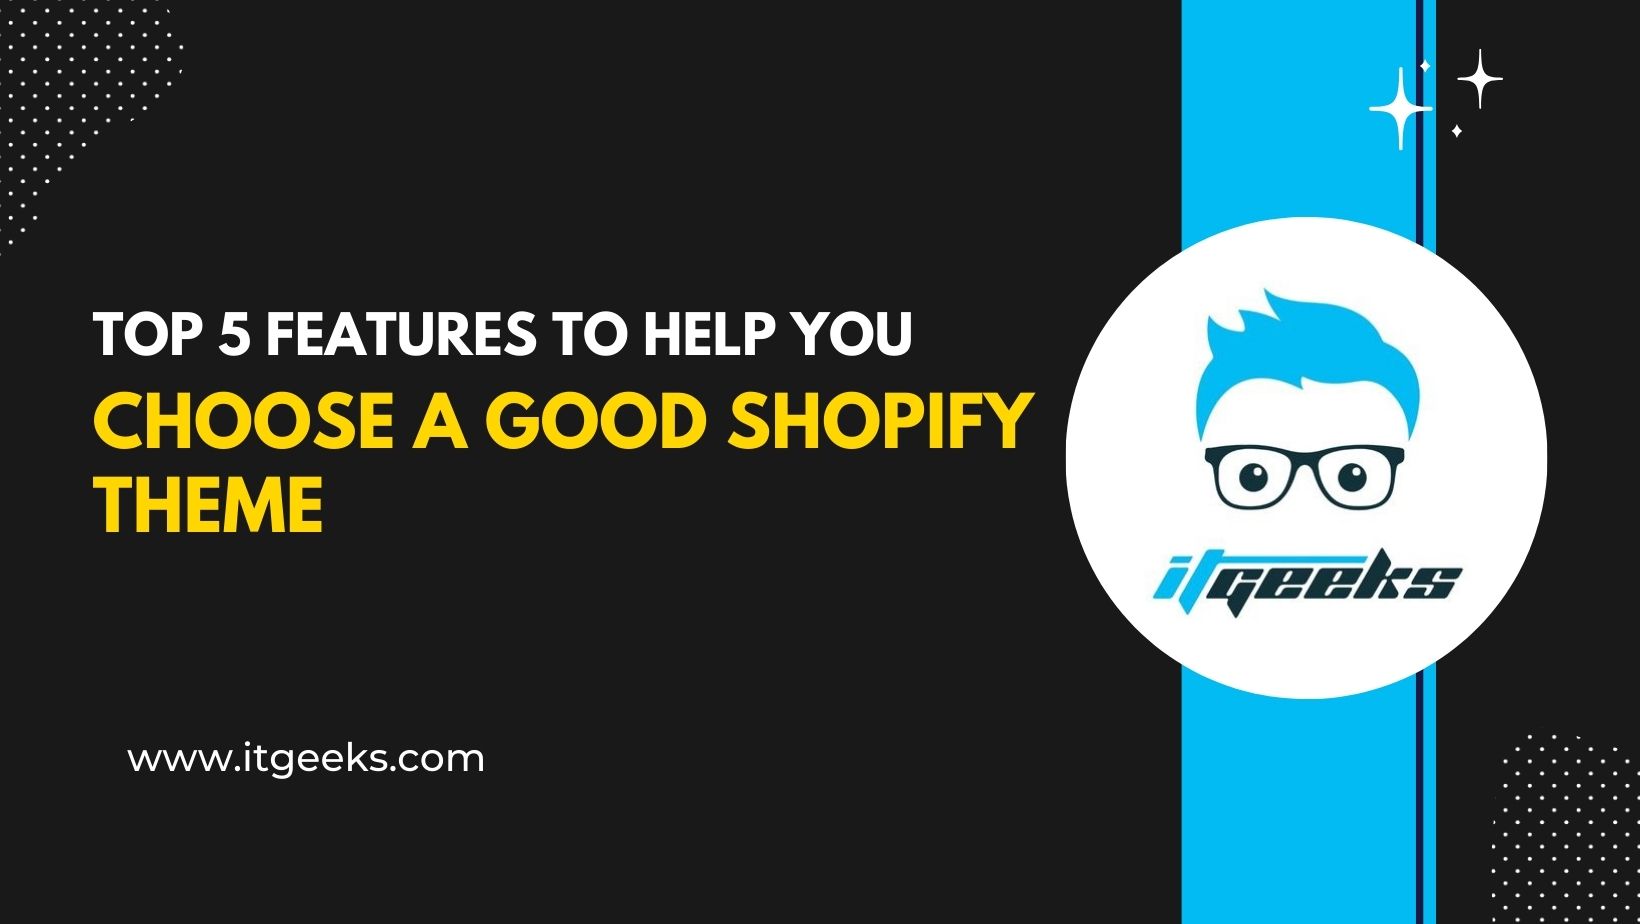 Top 5 features to help you choose a good Shopify theme